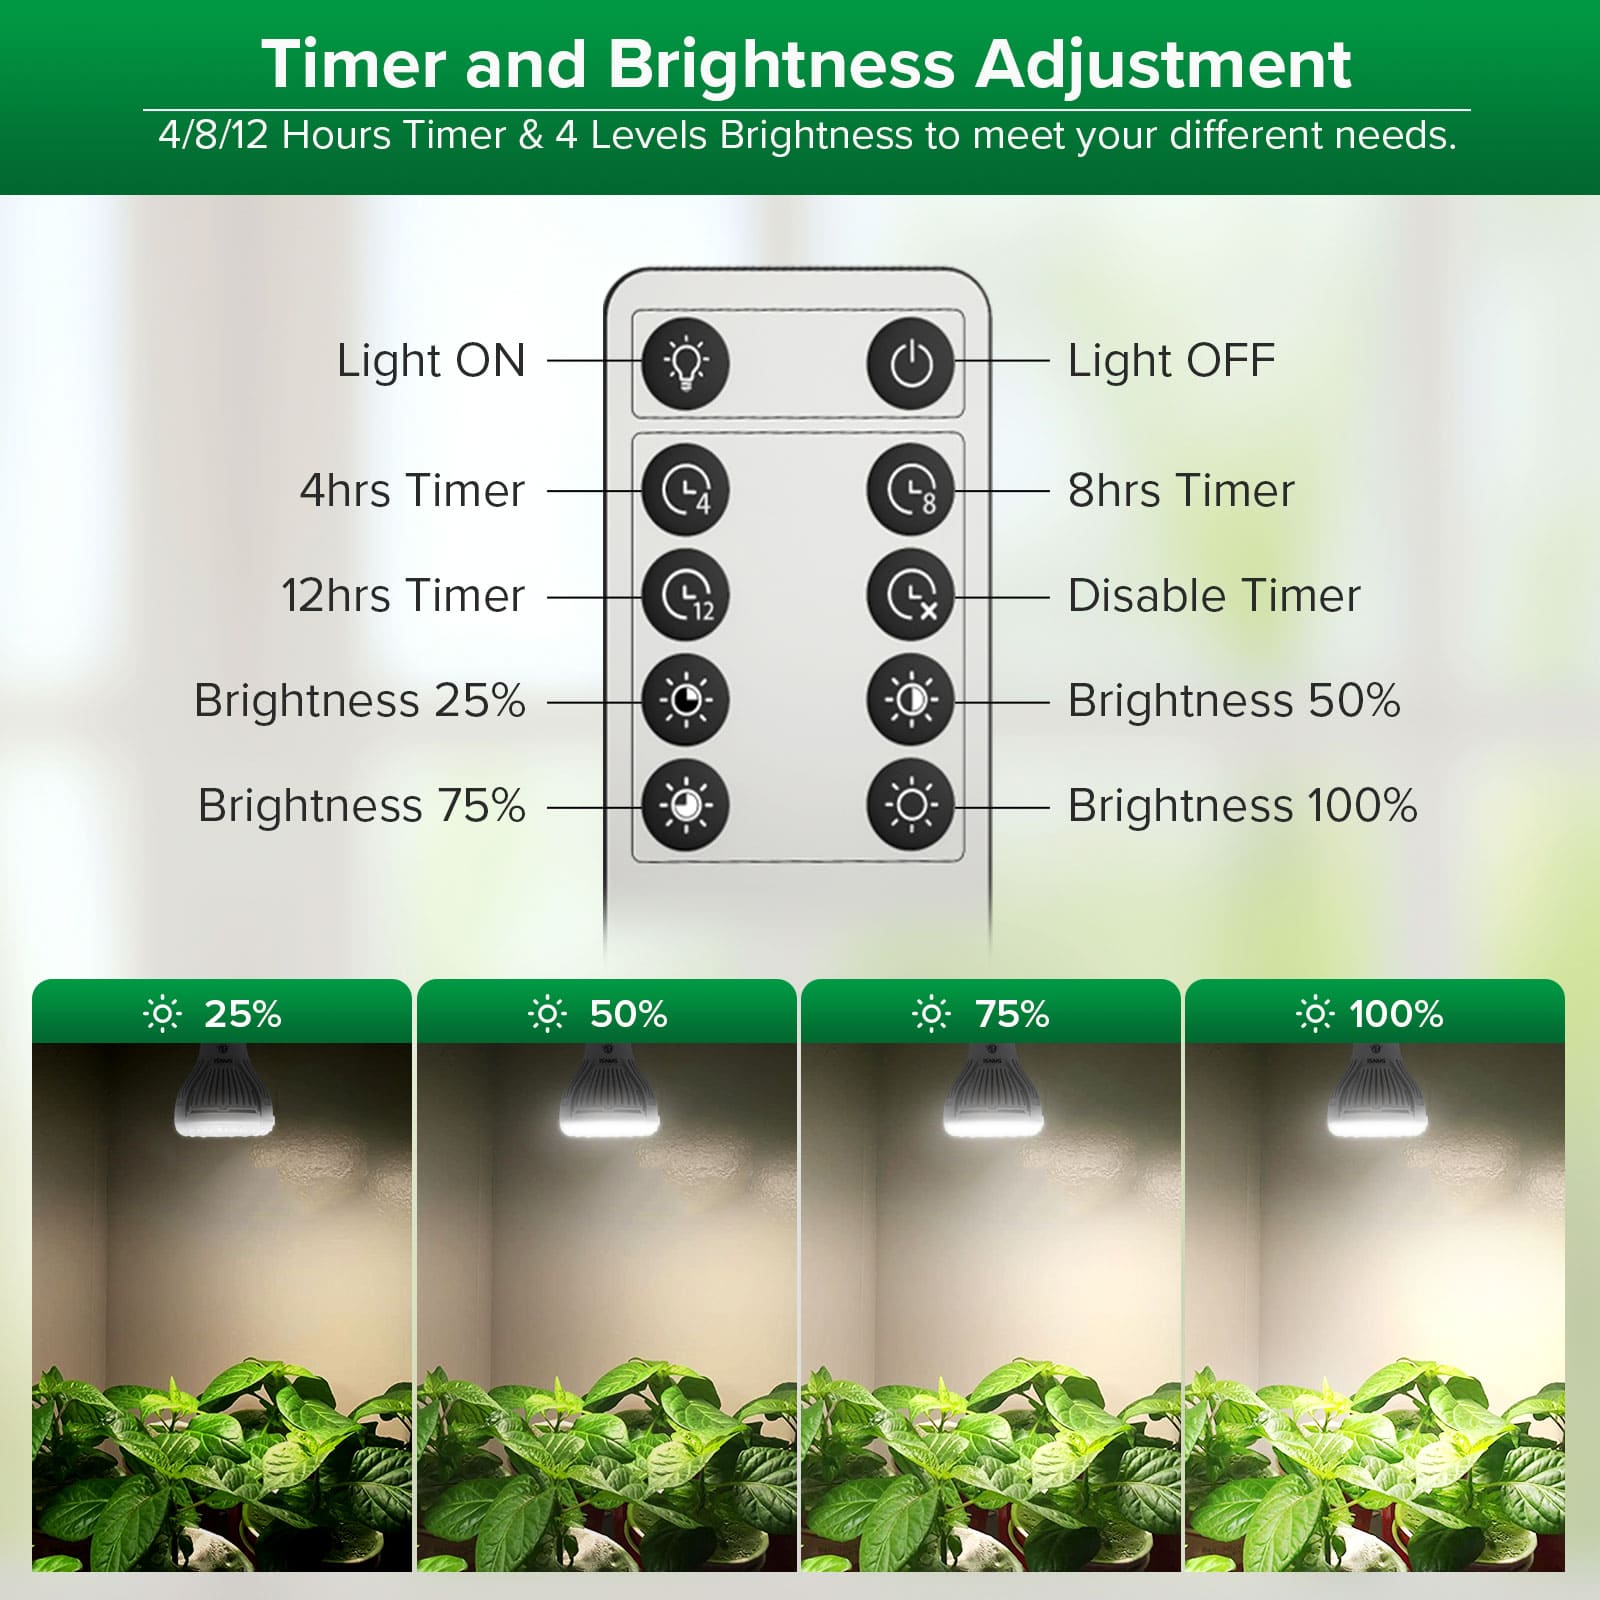 Timer and Brightness Adjustment：4/8/12 Hours Timer & 4 Levels Brightness to meet your different needs.